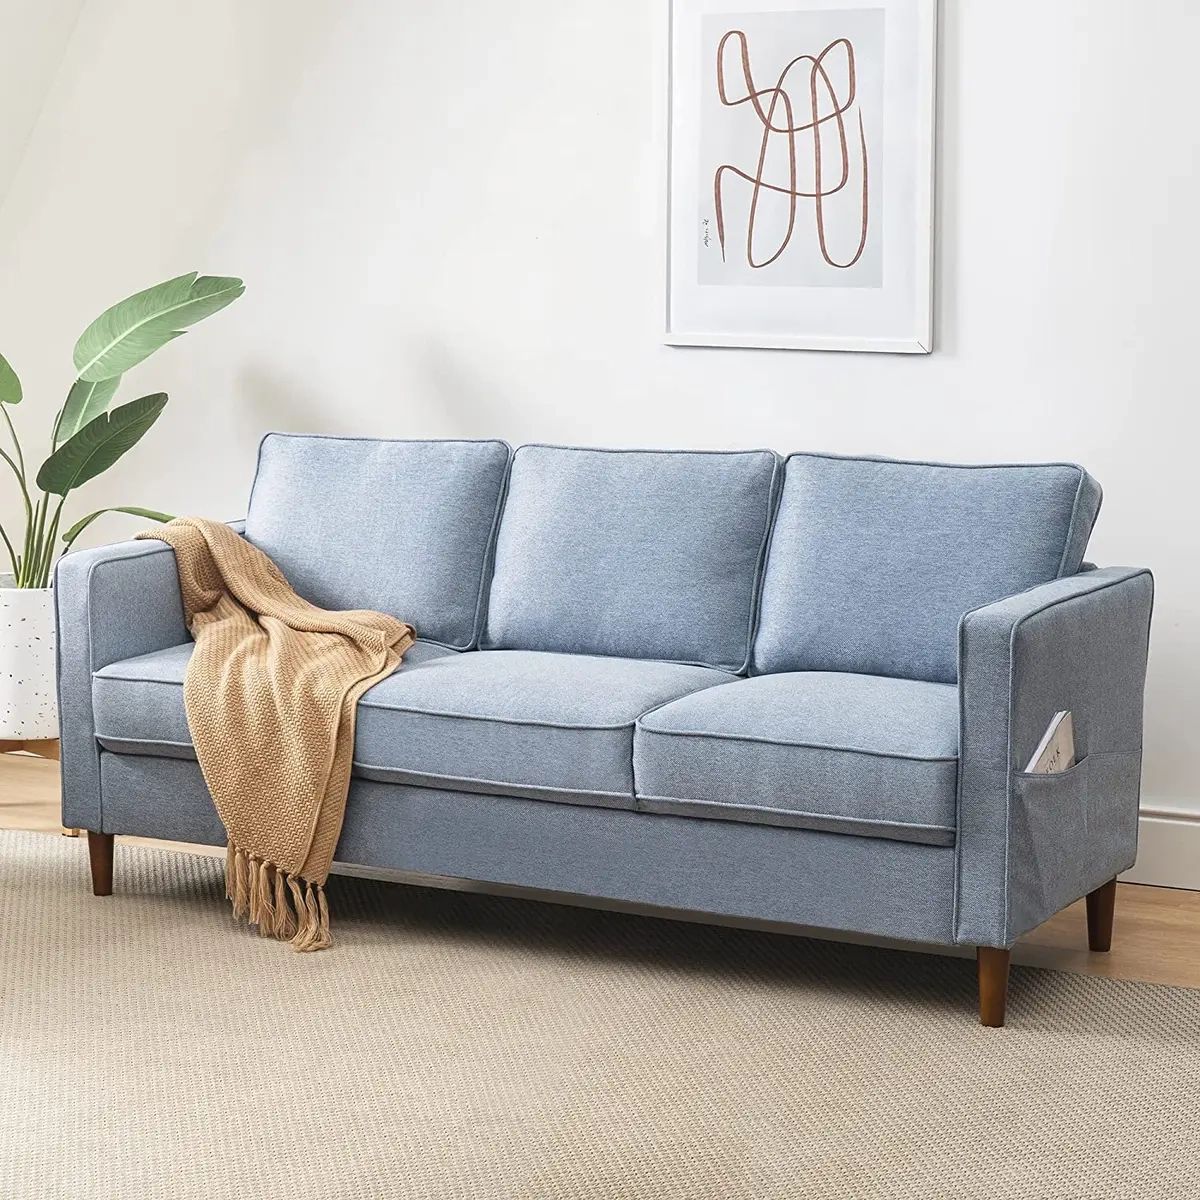 Hana Modern Linen Fabric Loveseat/sofa/couch With Armrest Pockets, Dusty  Blue | Ebay Pertaining To Modern Blue Linen Sofas (View 2 of 15)